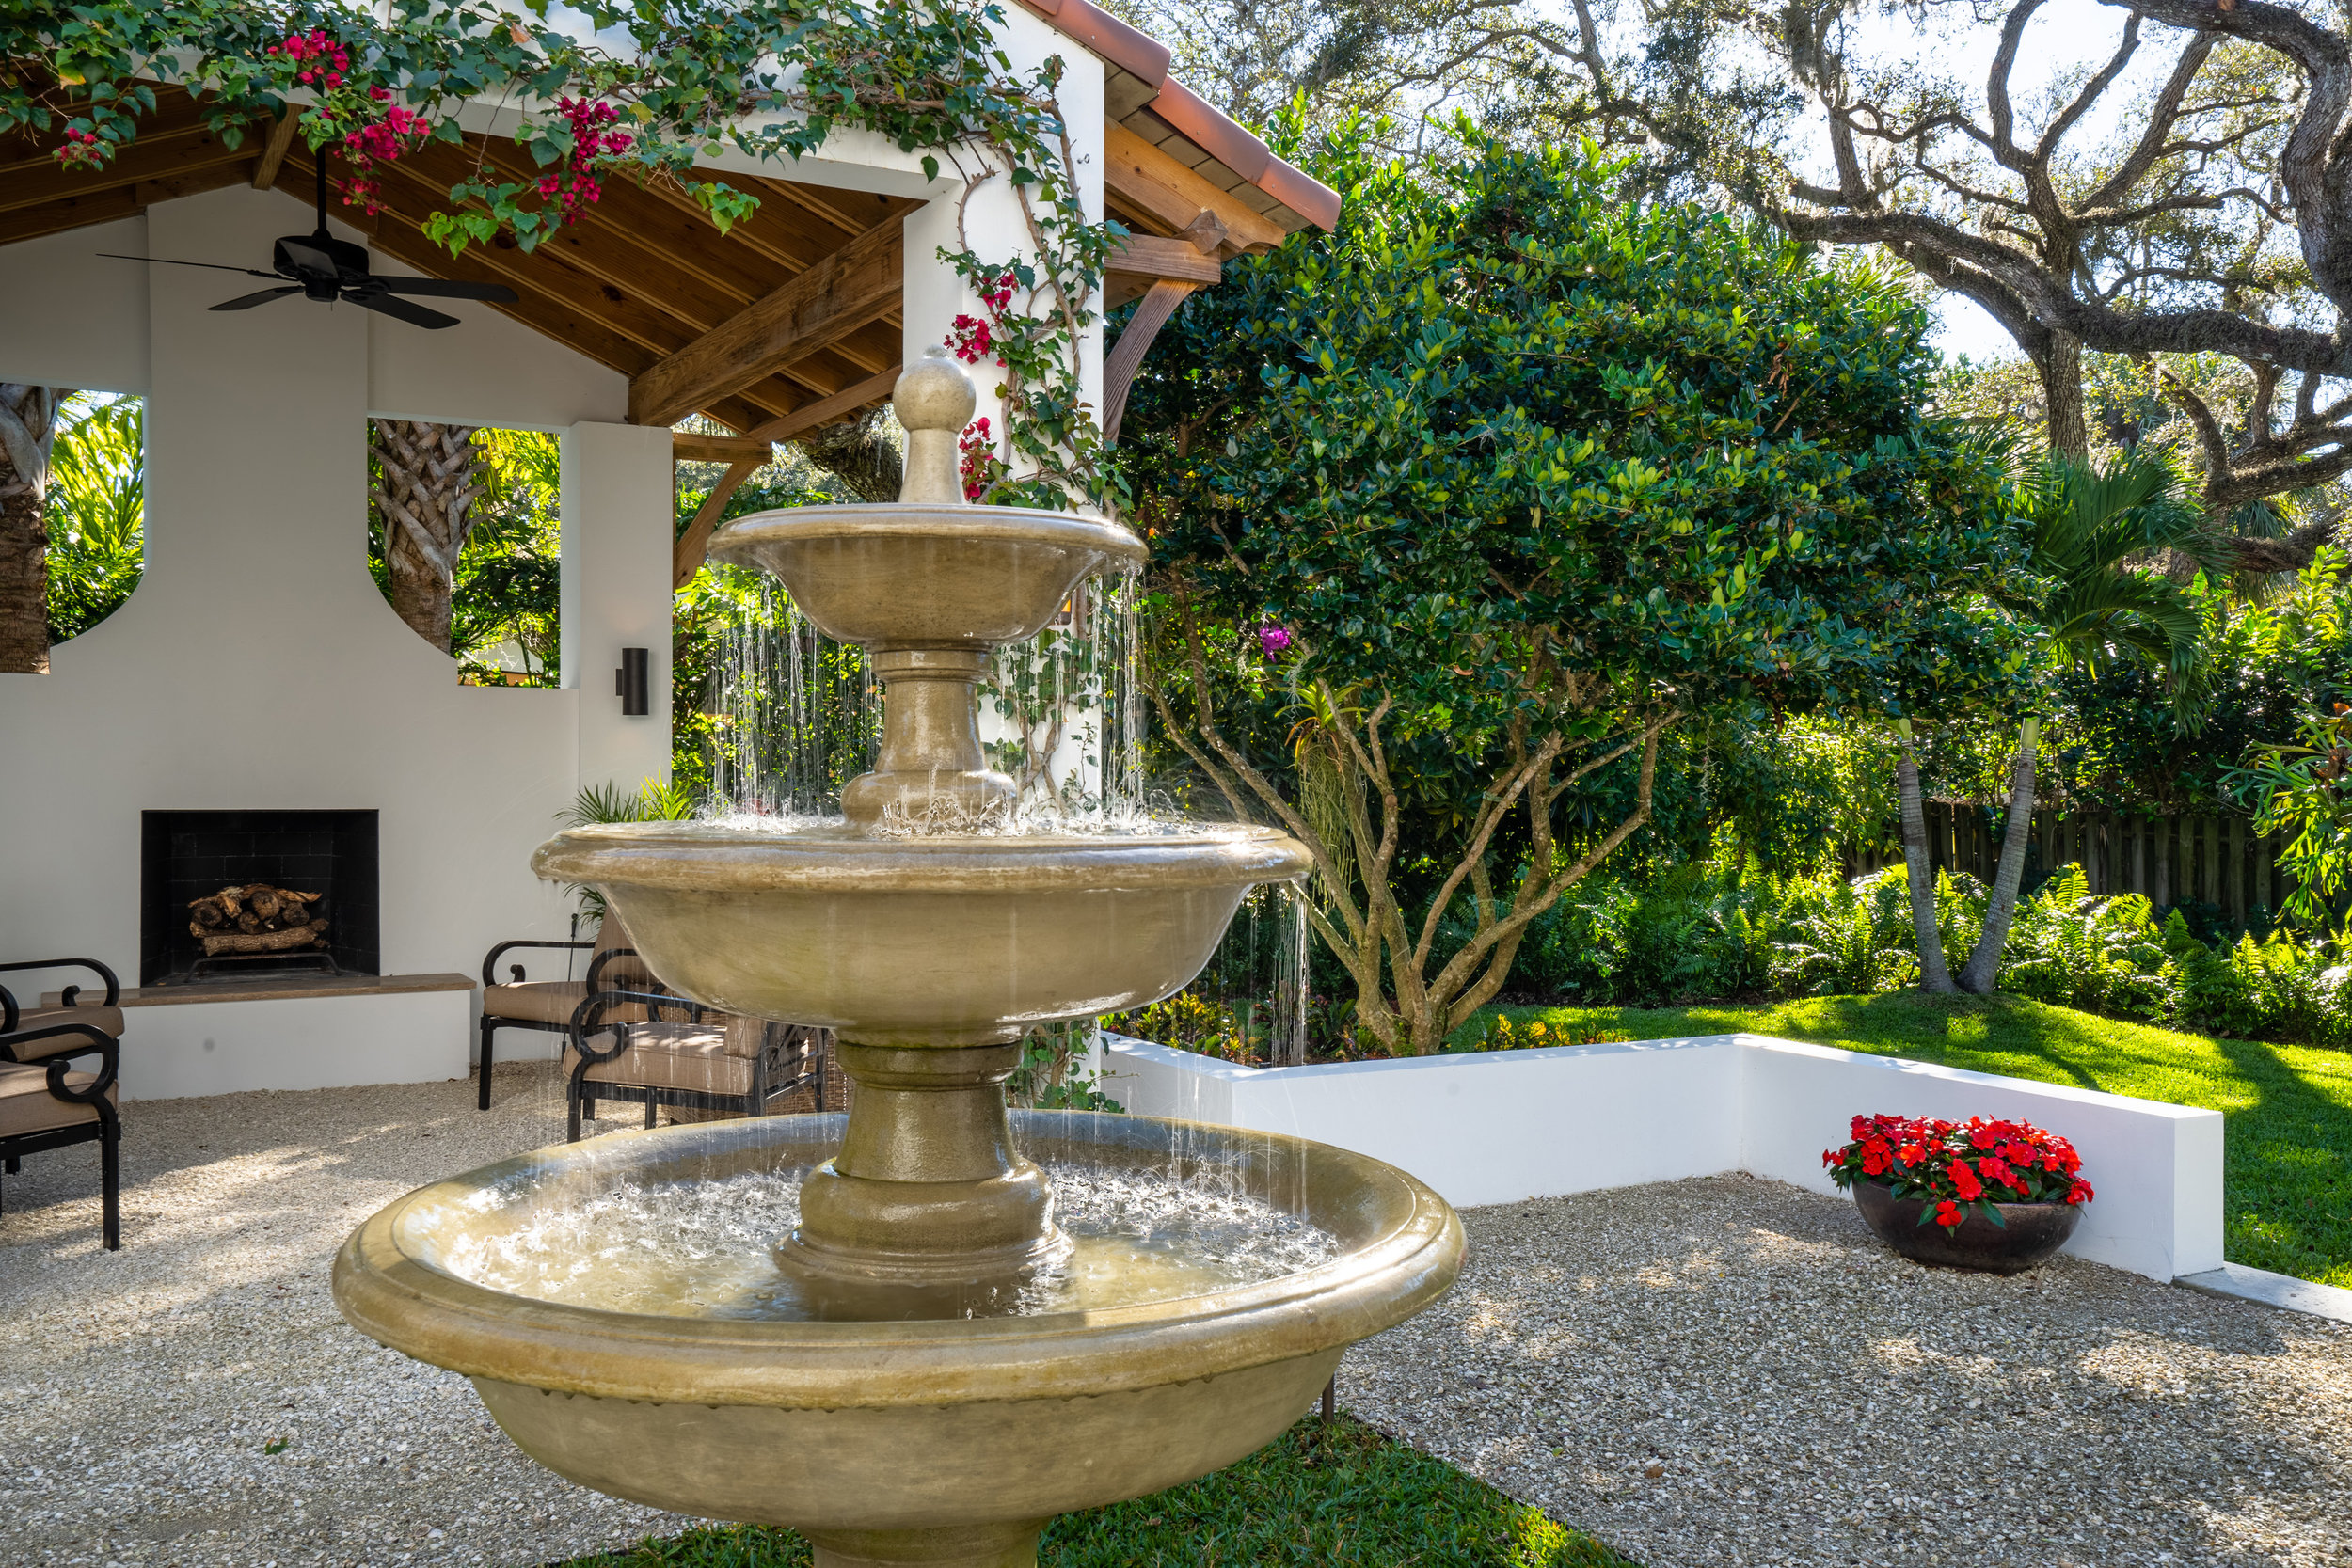 Decorative fountain in serene backyard of this luxury home.